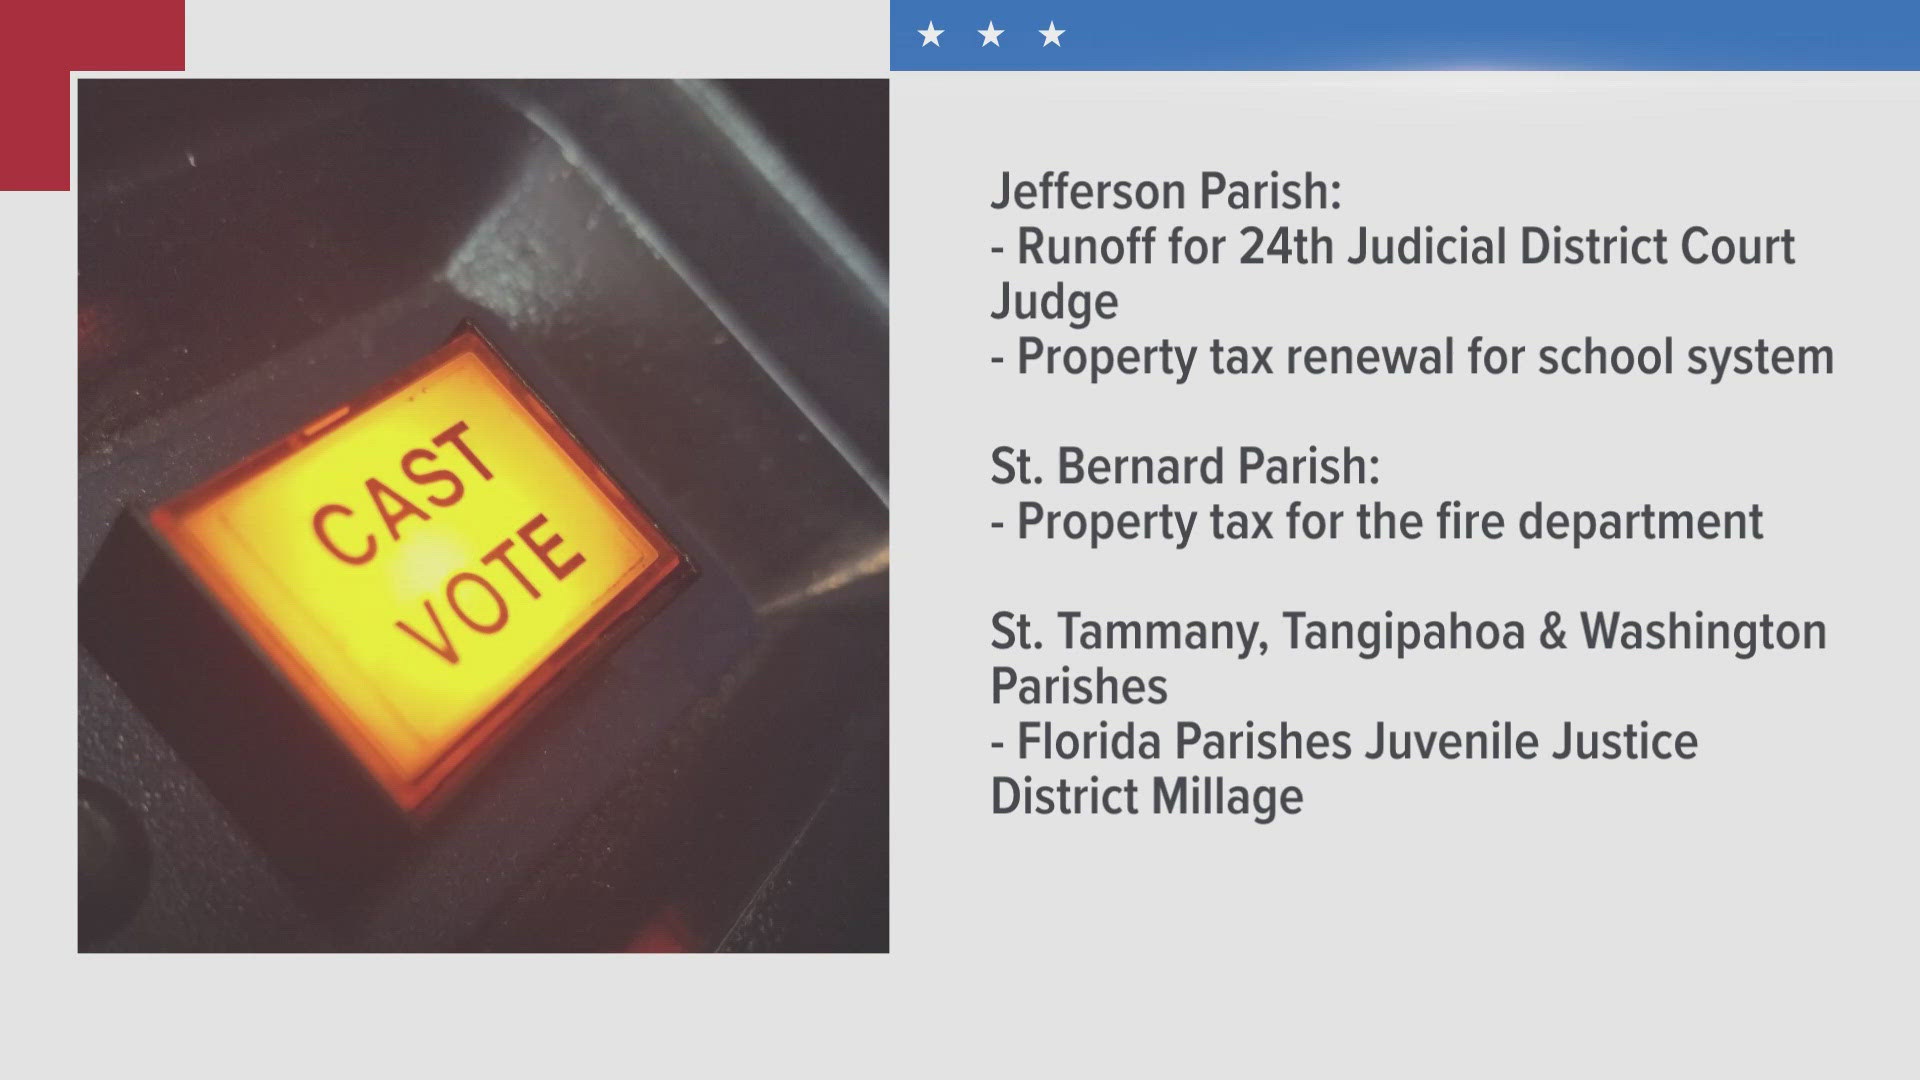 There's nothing on the ballot in New Orleans, but Jefferson Parish voters will decide on a heated judicial runoff, plus other neighboring parish elections.